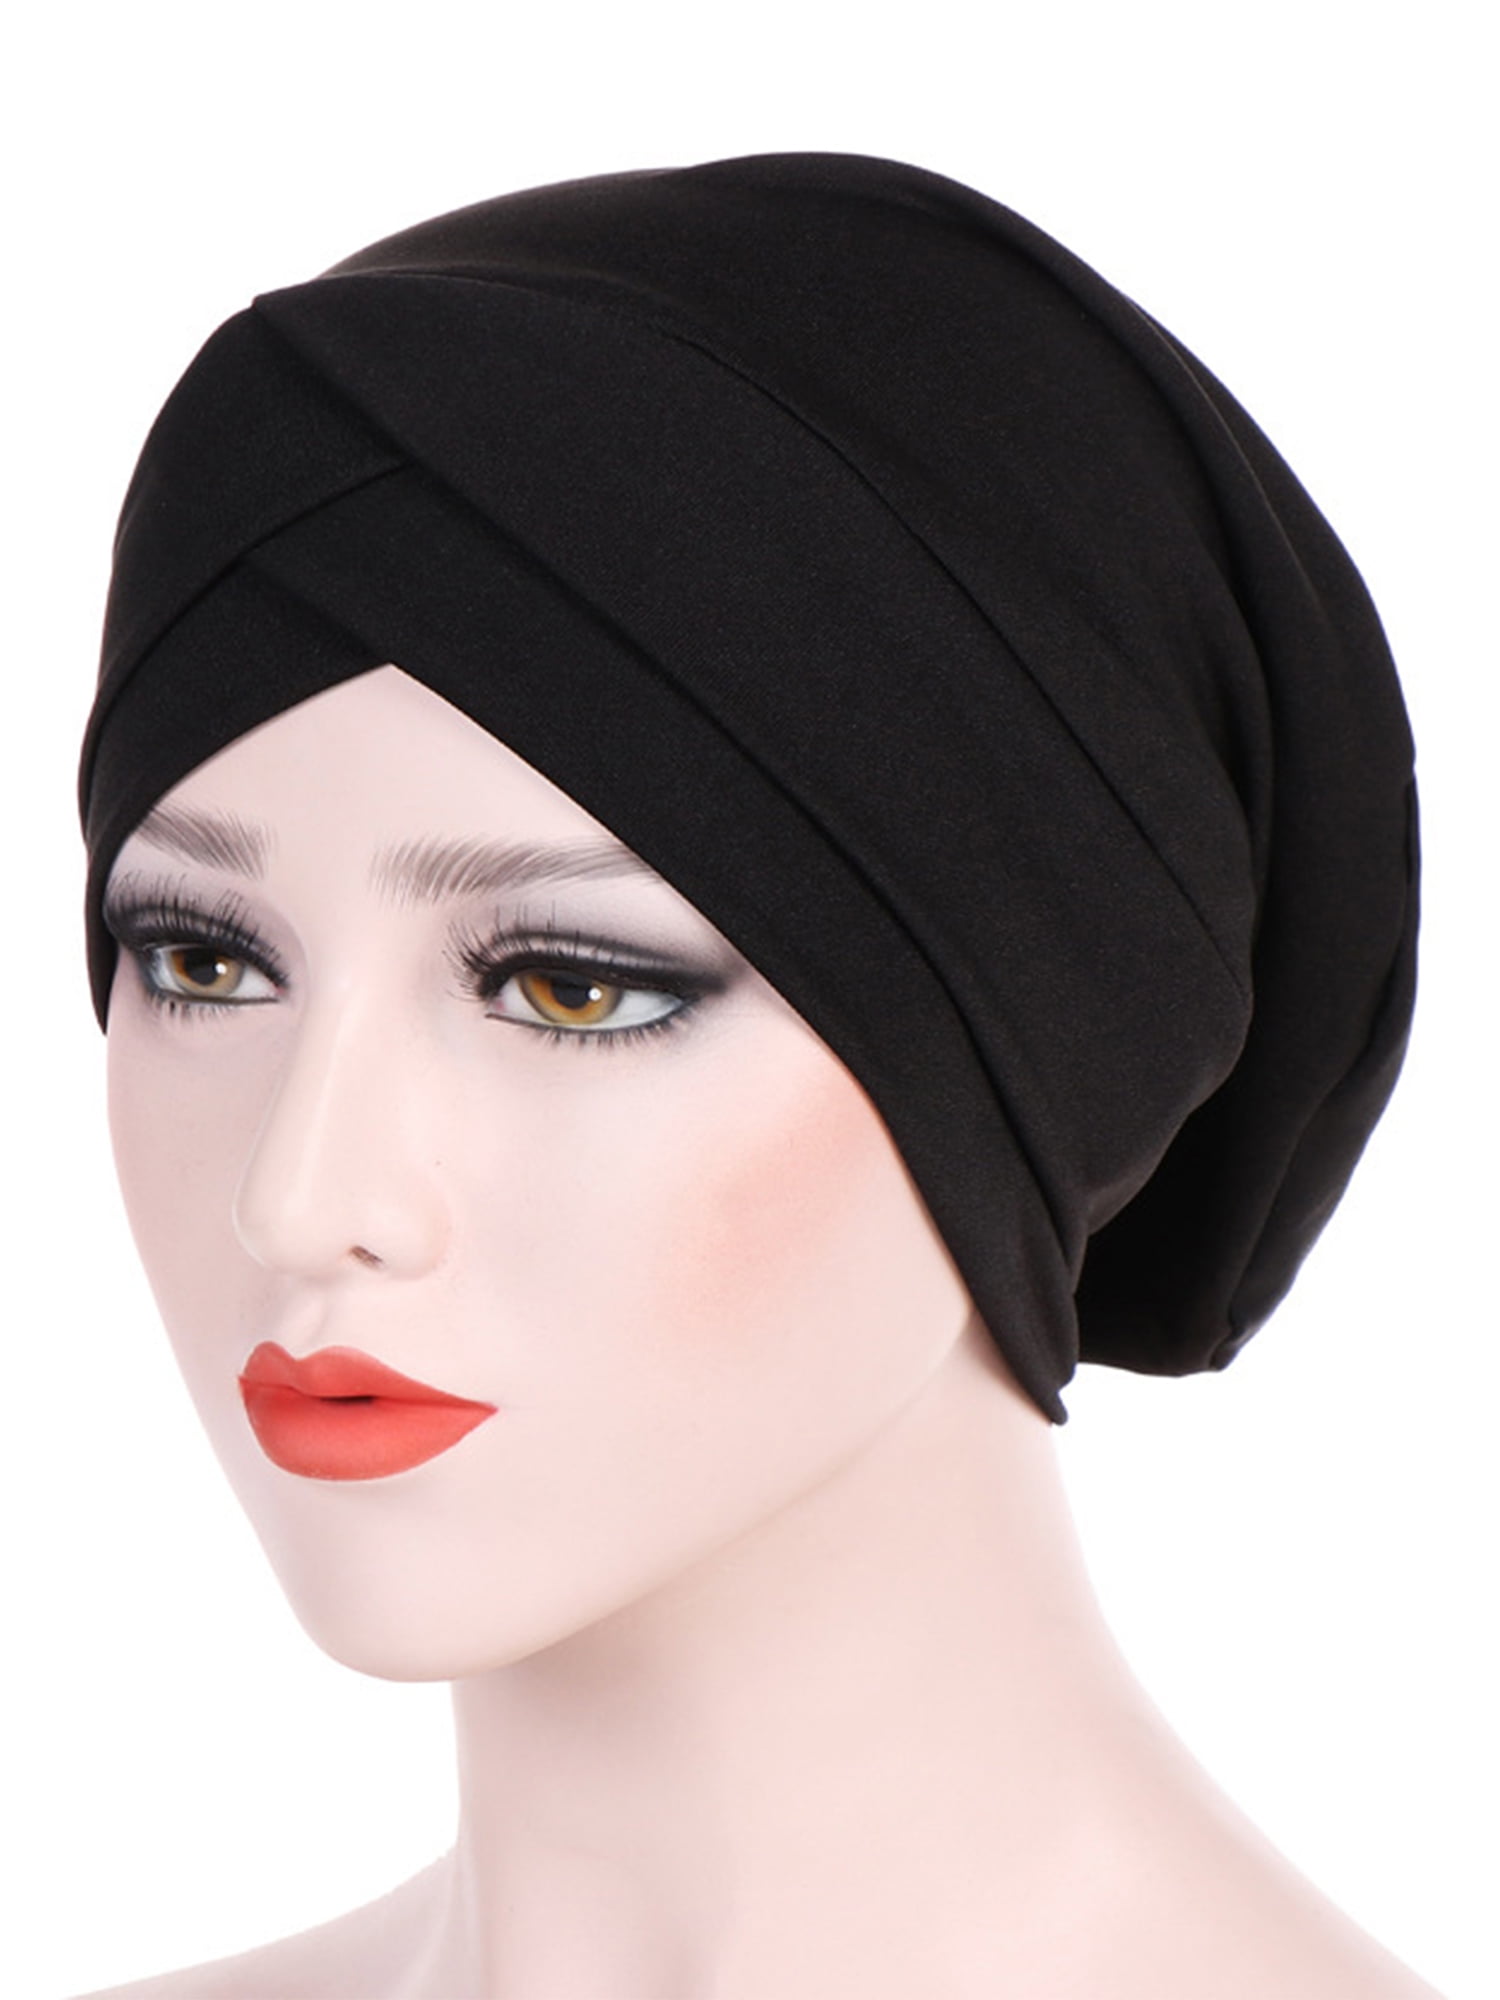 Hijab Lace top piece hijab hat Head Islamic Cover Bonnet Cap Cancer Hat Chemo 